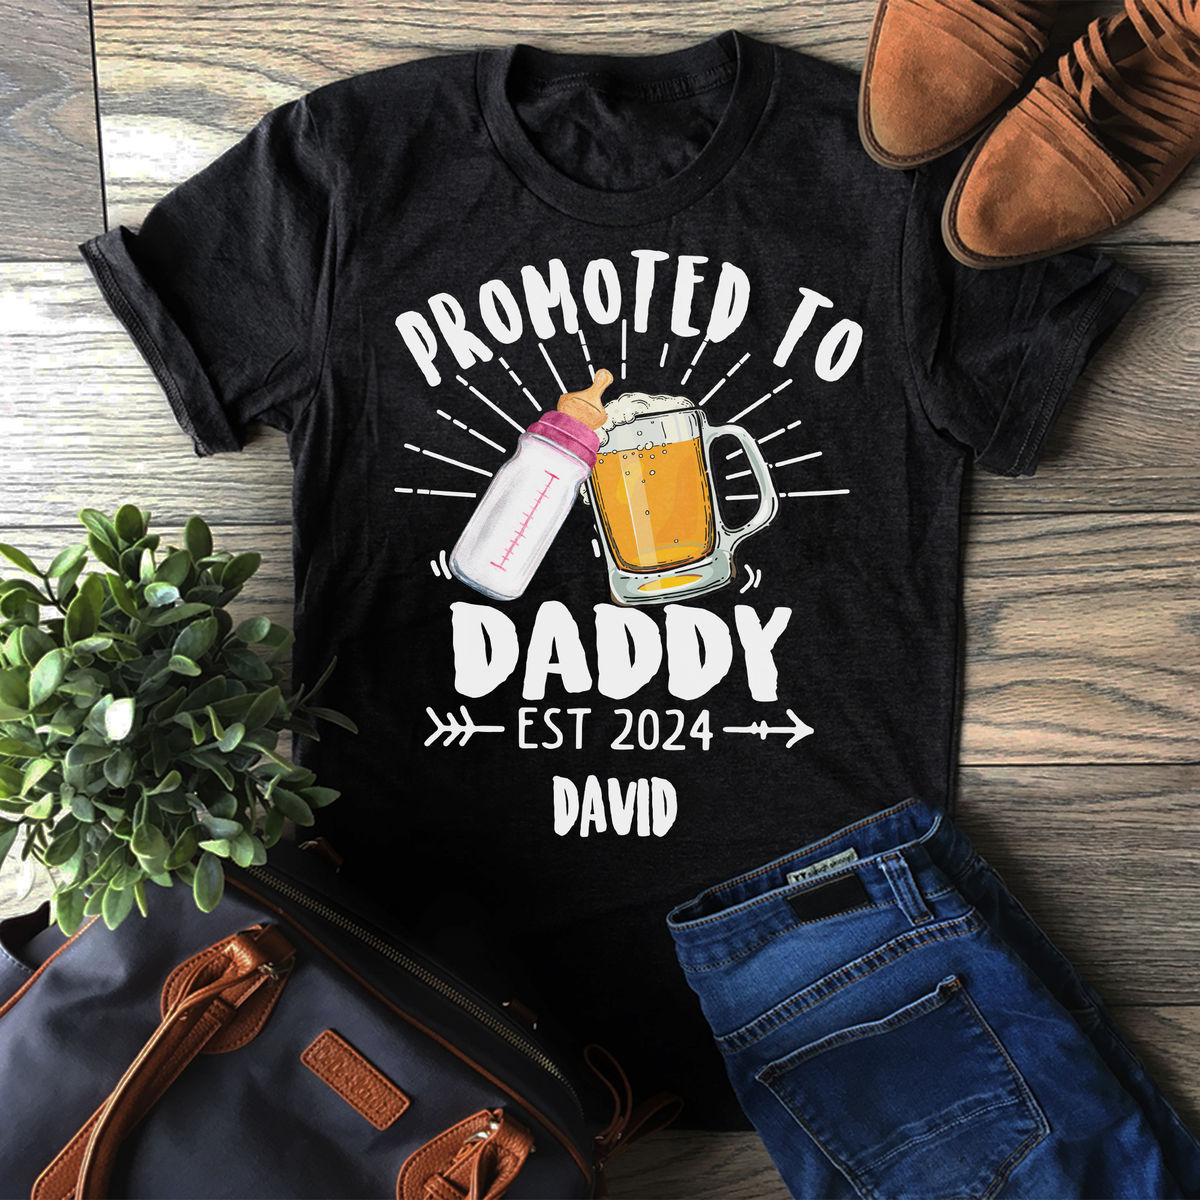 Personalized Shirt - Father's Day Gifts - Promoted To Daddy - Custom Drink For Dad, Mom, Baby - New Dad Gifts, Gifts For Dad - Father's Day Shirts_3